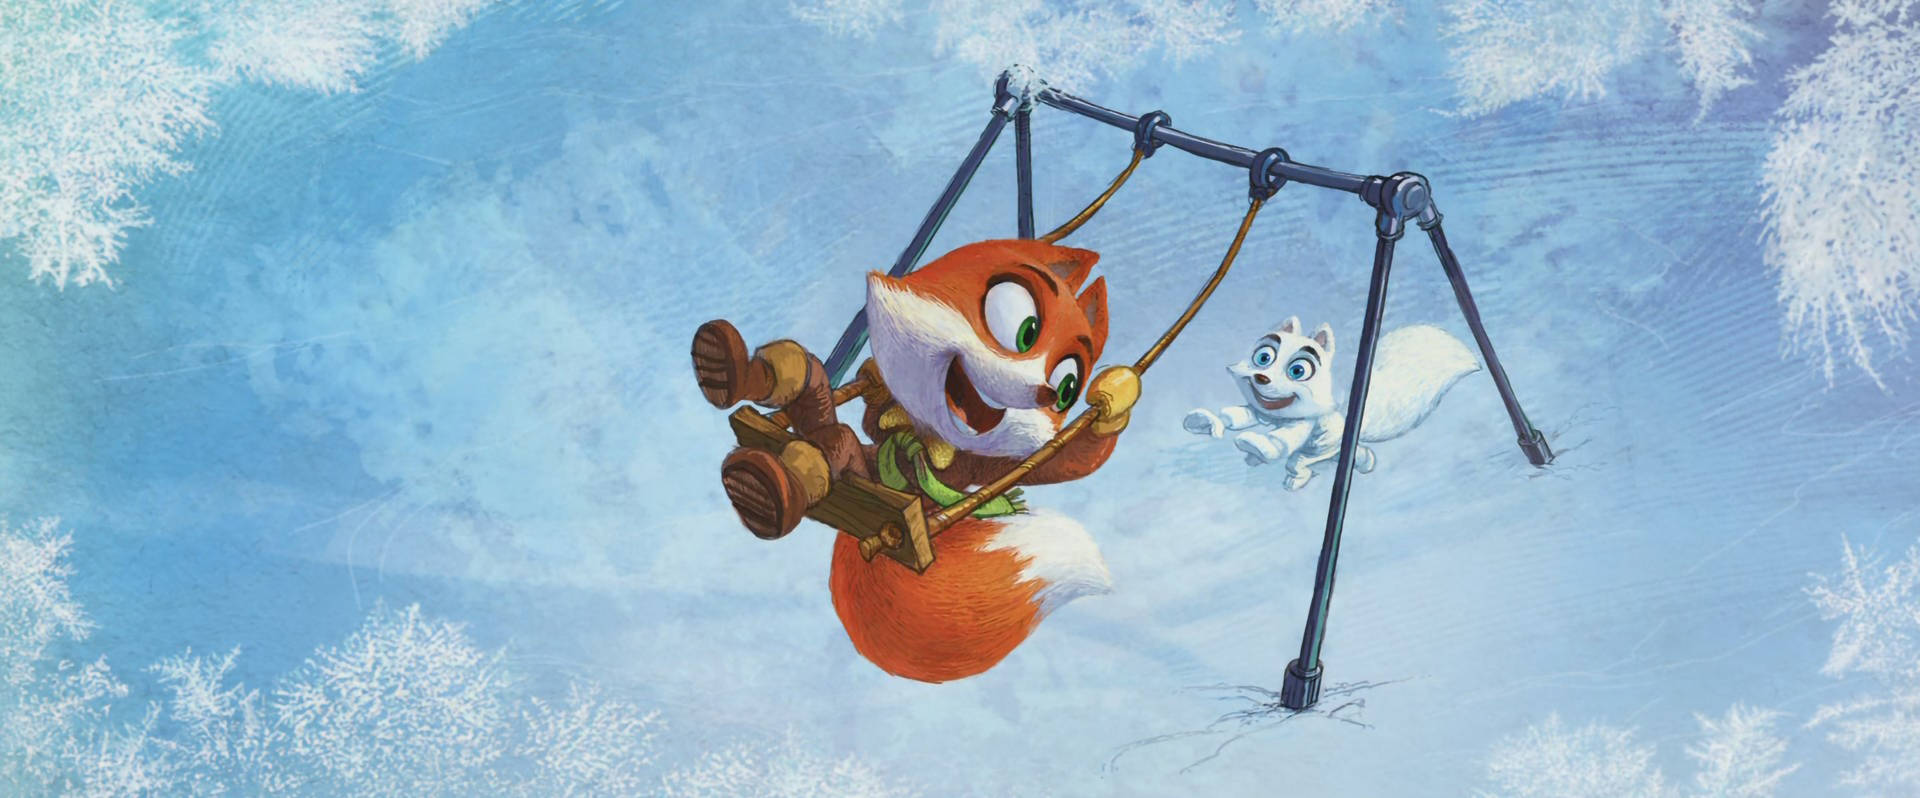 Arctic Justice On The Swing Wallpaper